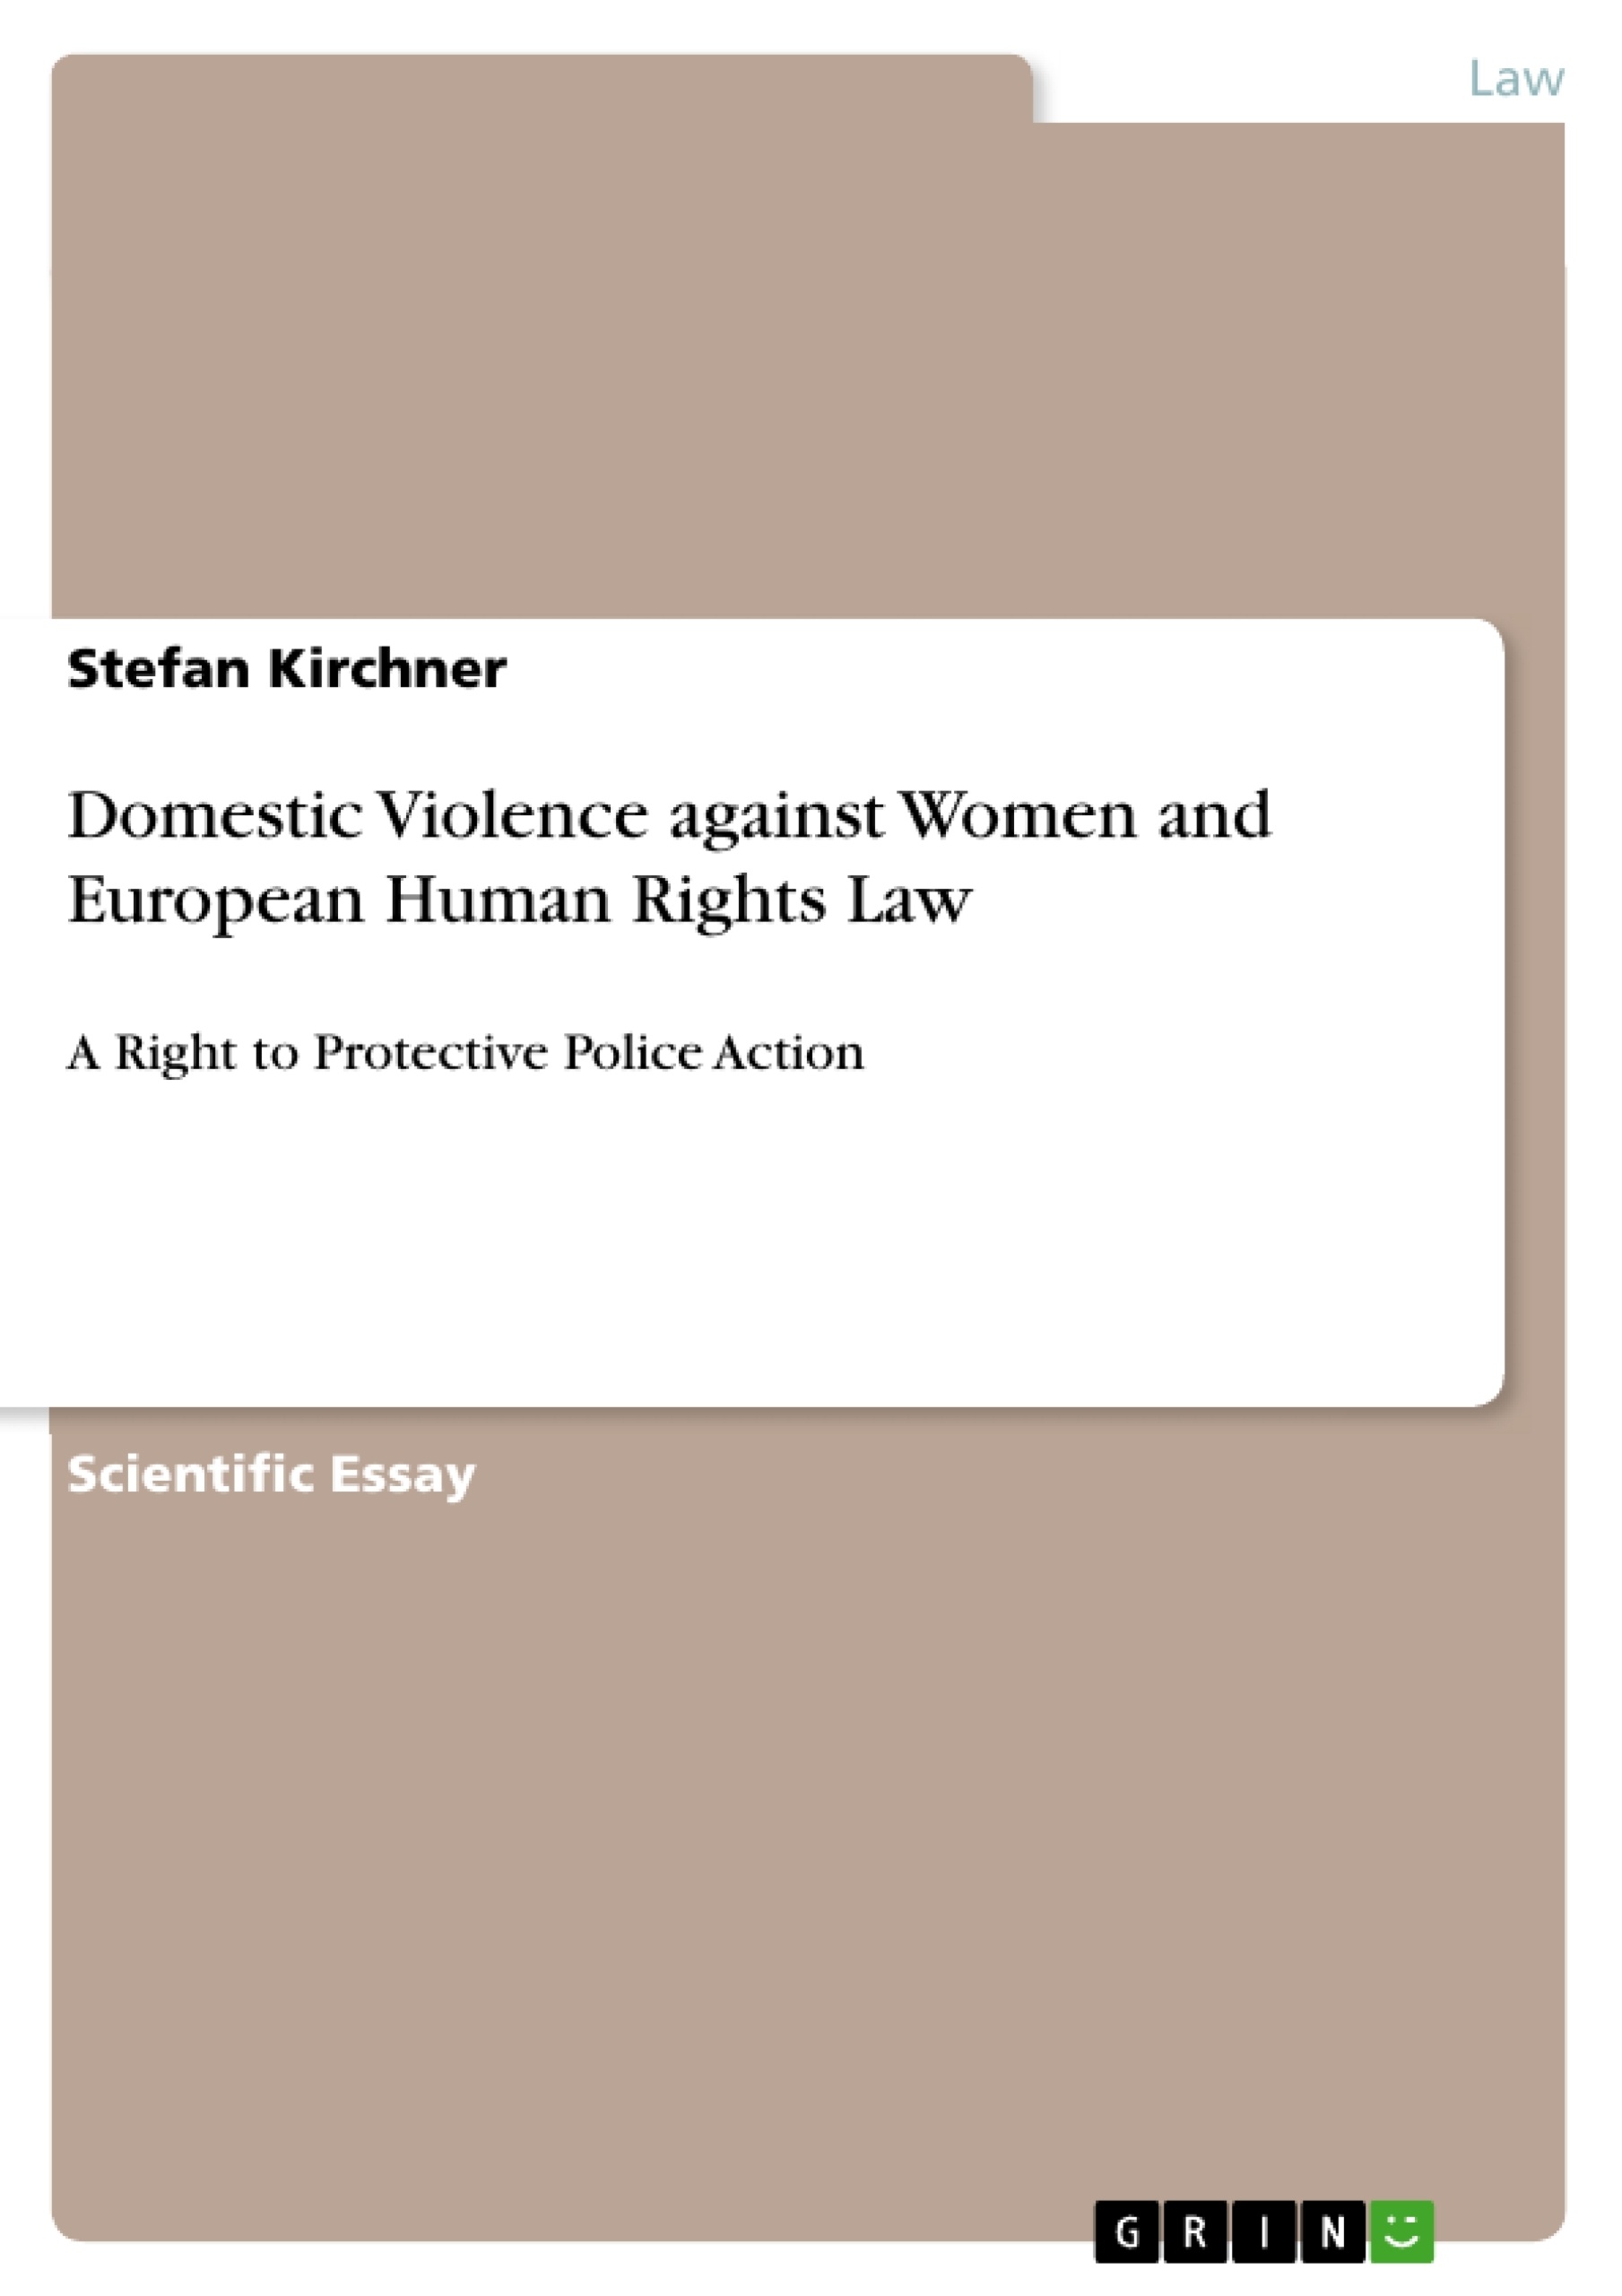 Title: Domestic Violence against Women and European Human Rights Law